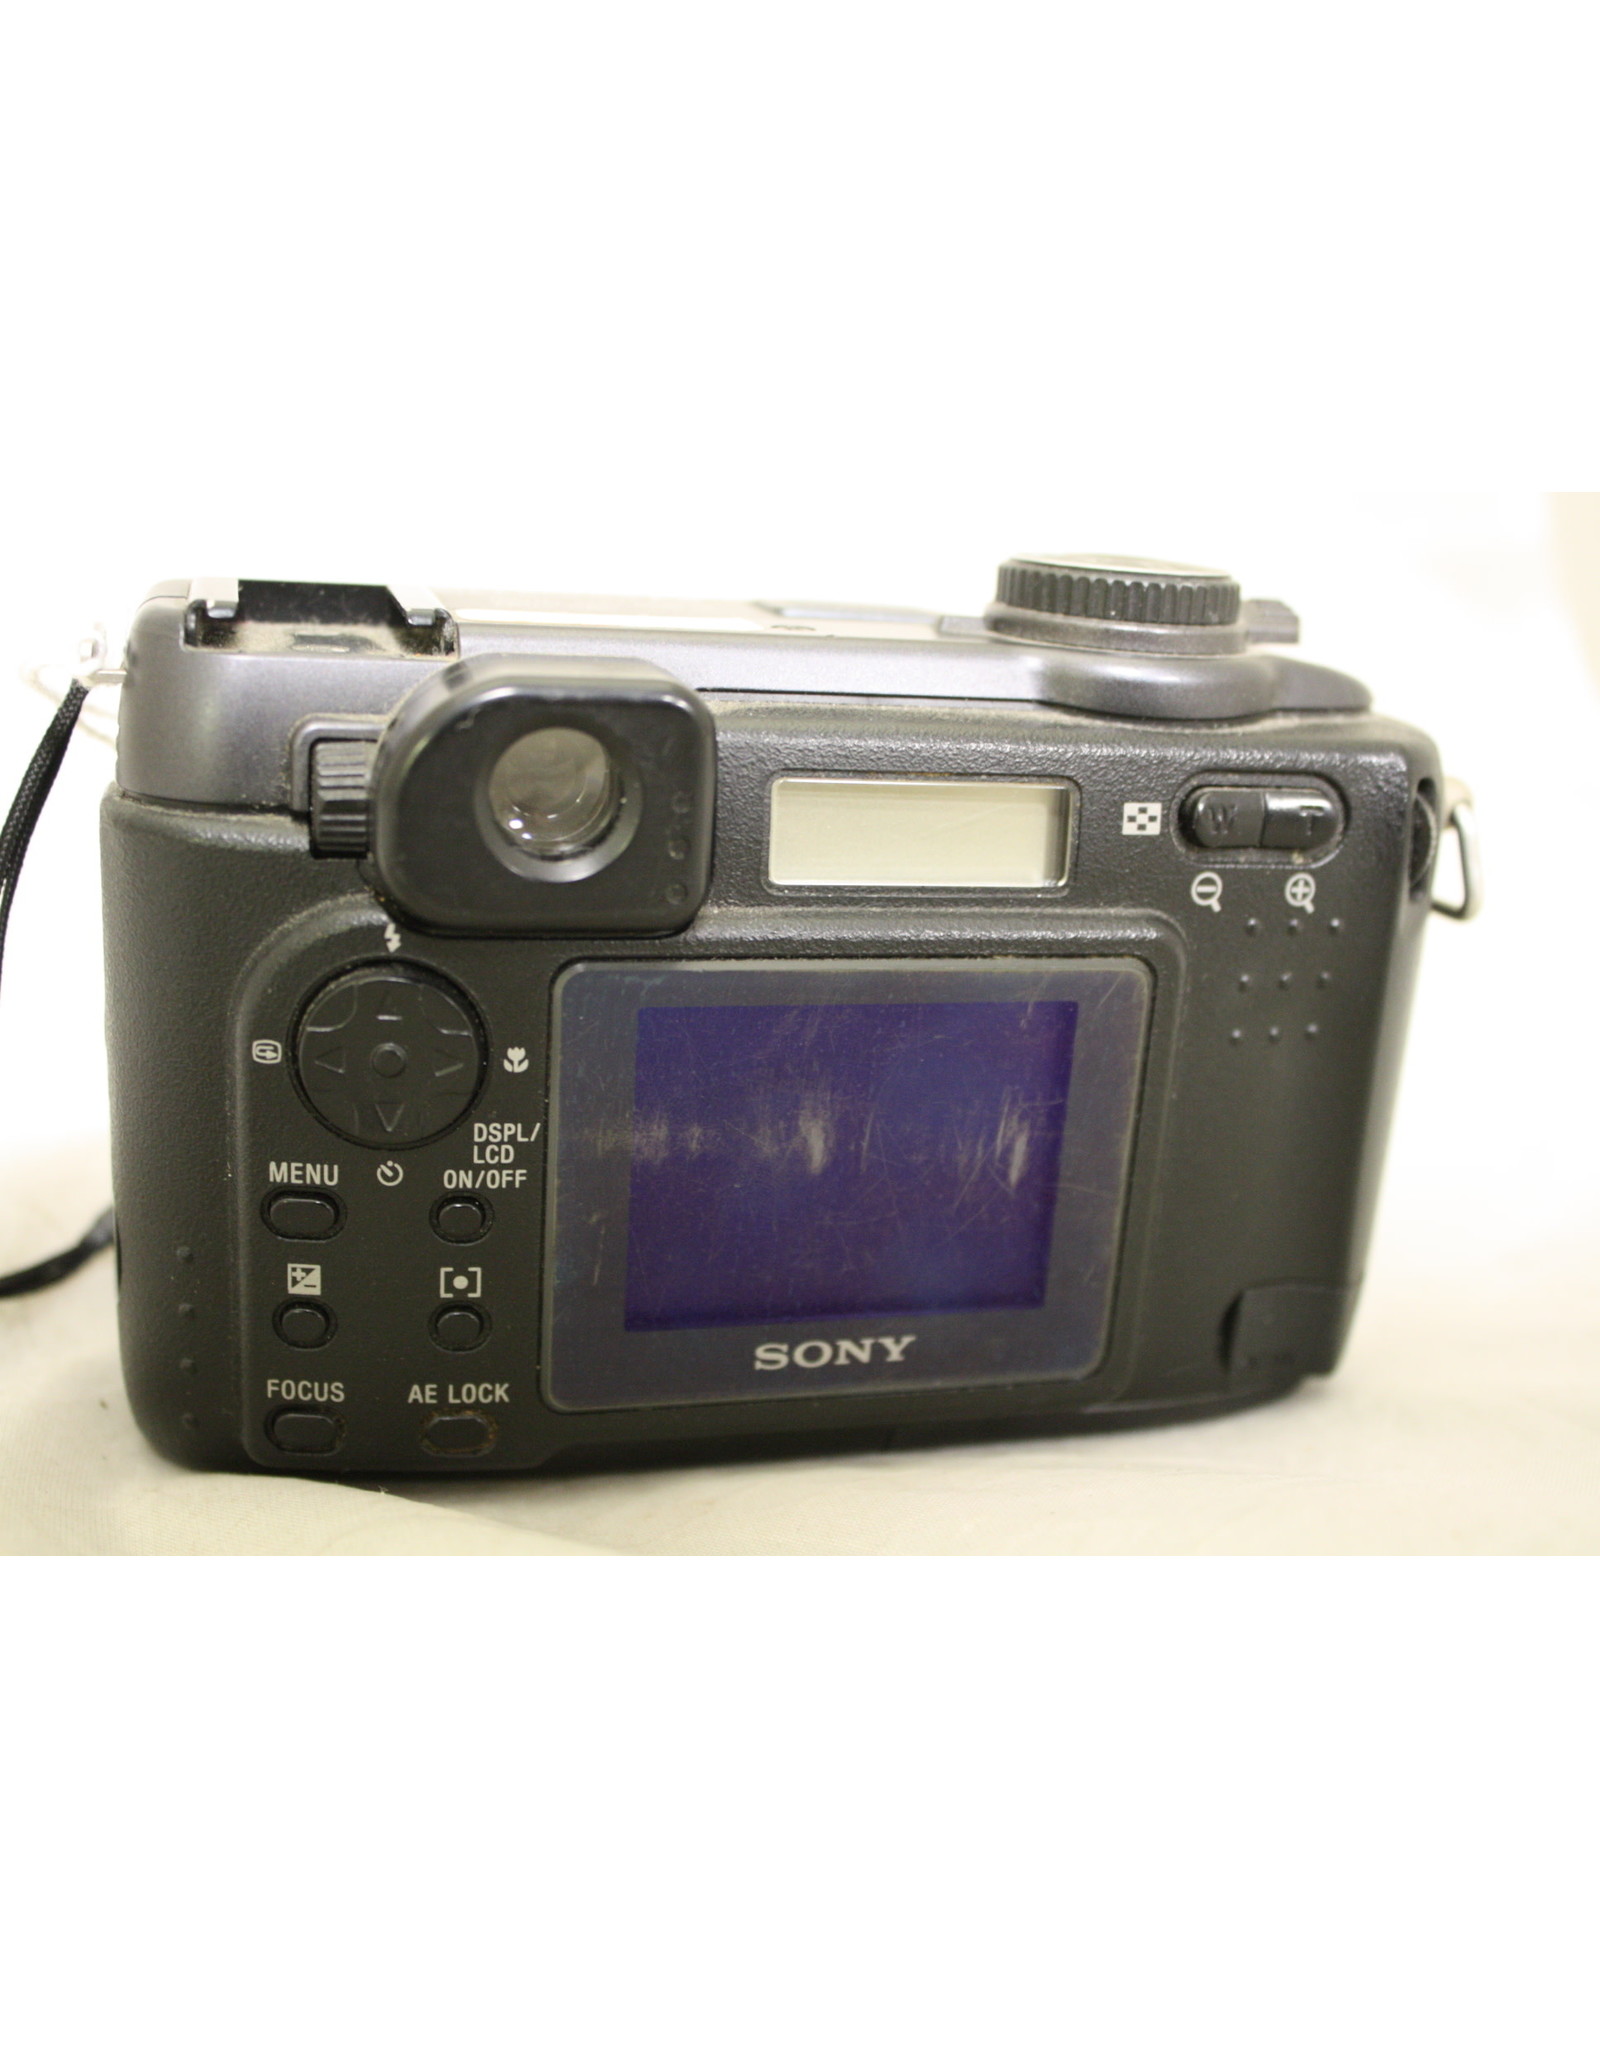 Sony Cyber-Shot DSC-S85 4.1 MP Digital Camera (Missing charger)  (Pre-owned)